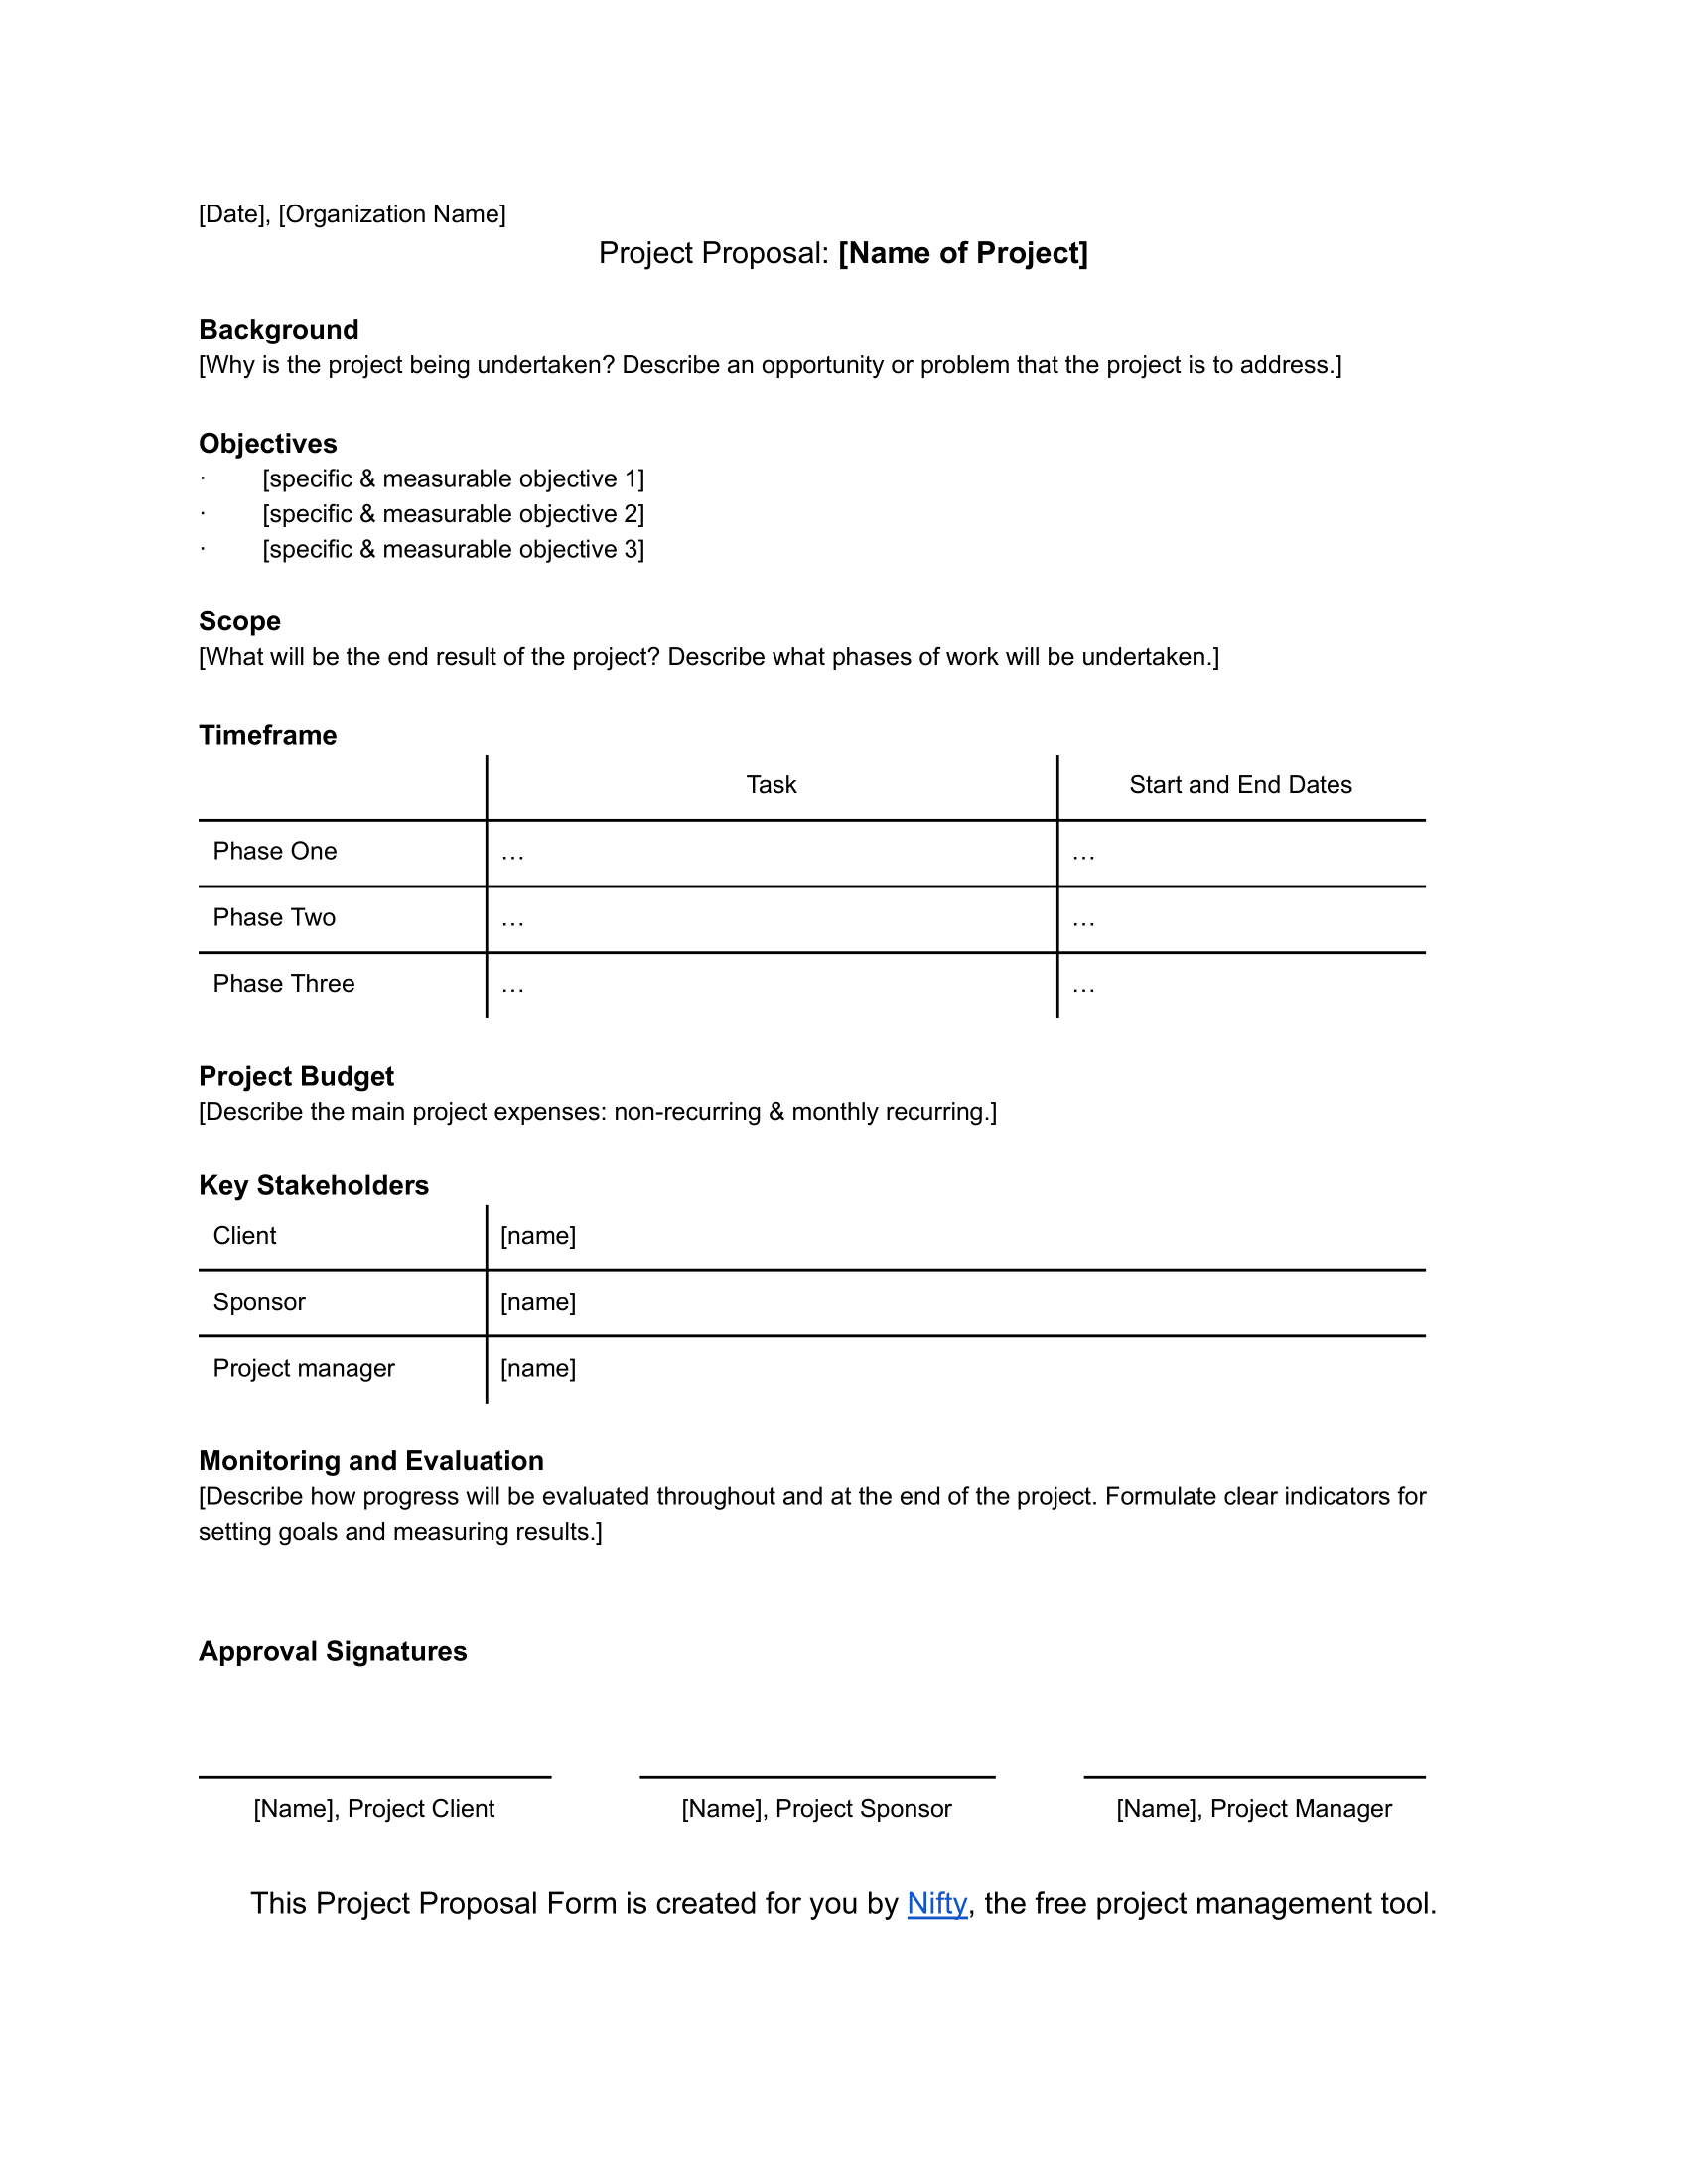 Project Proposal Template From Nifty 1 3 